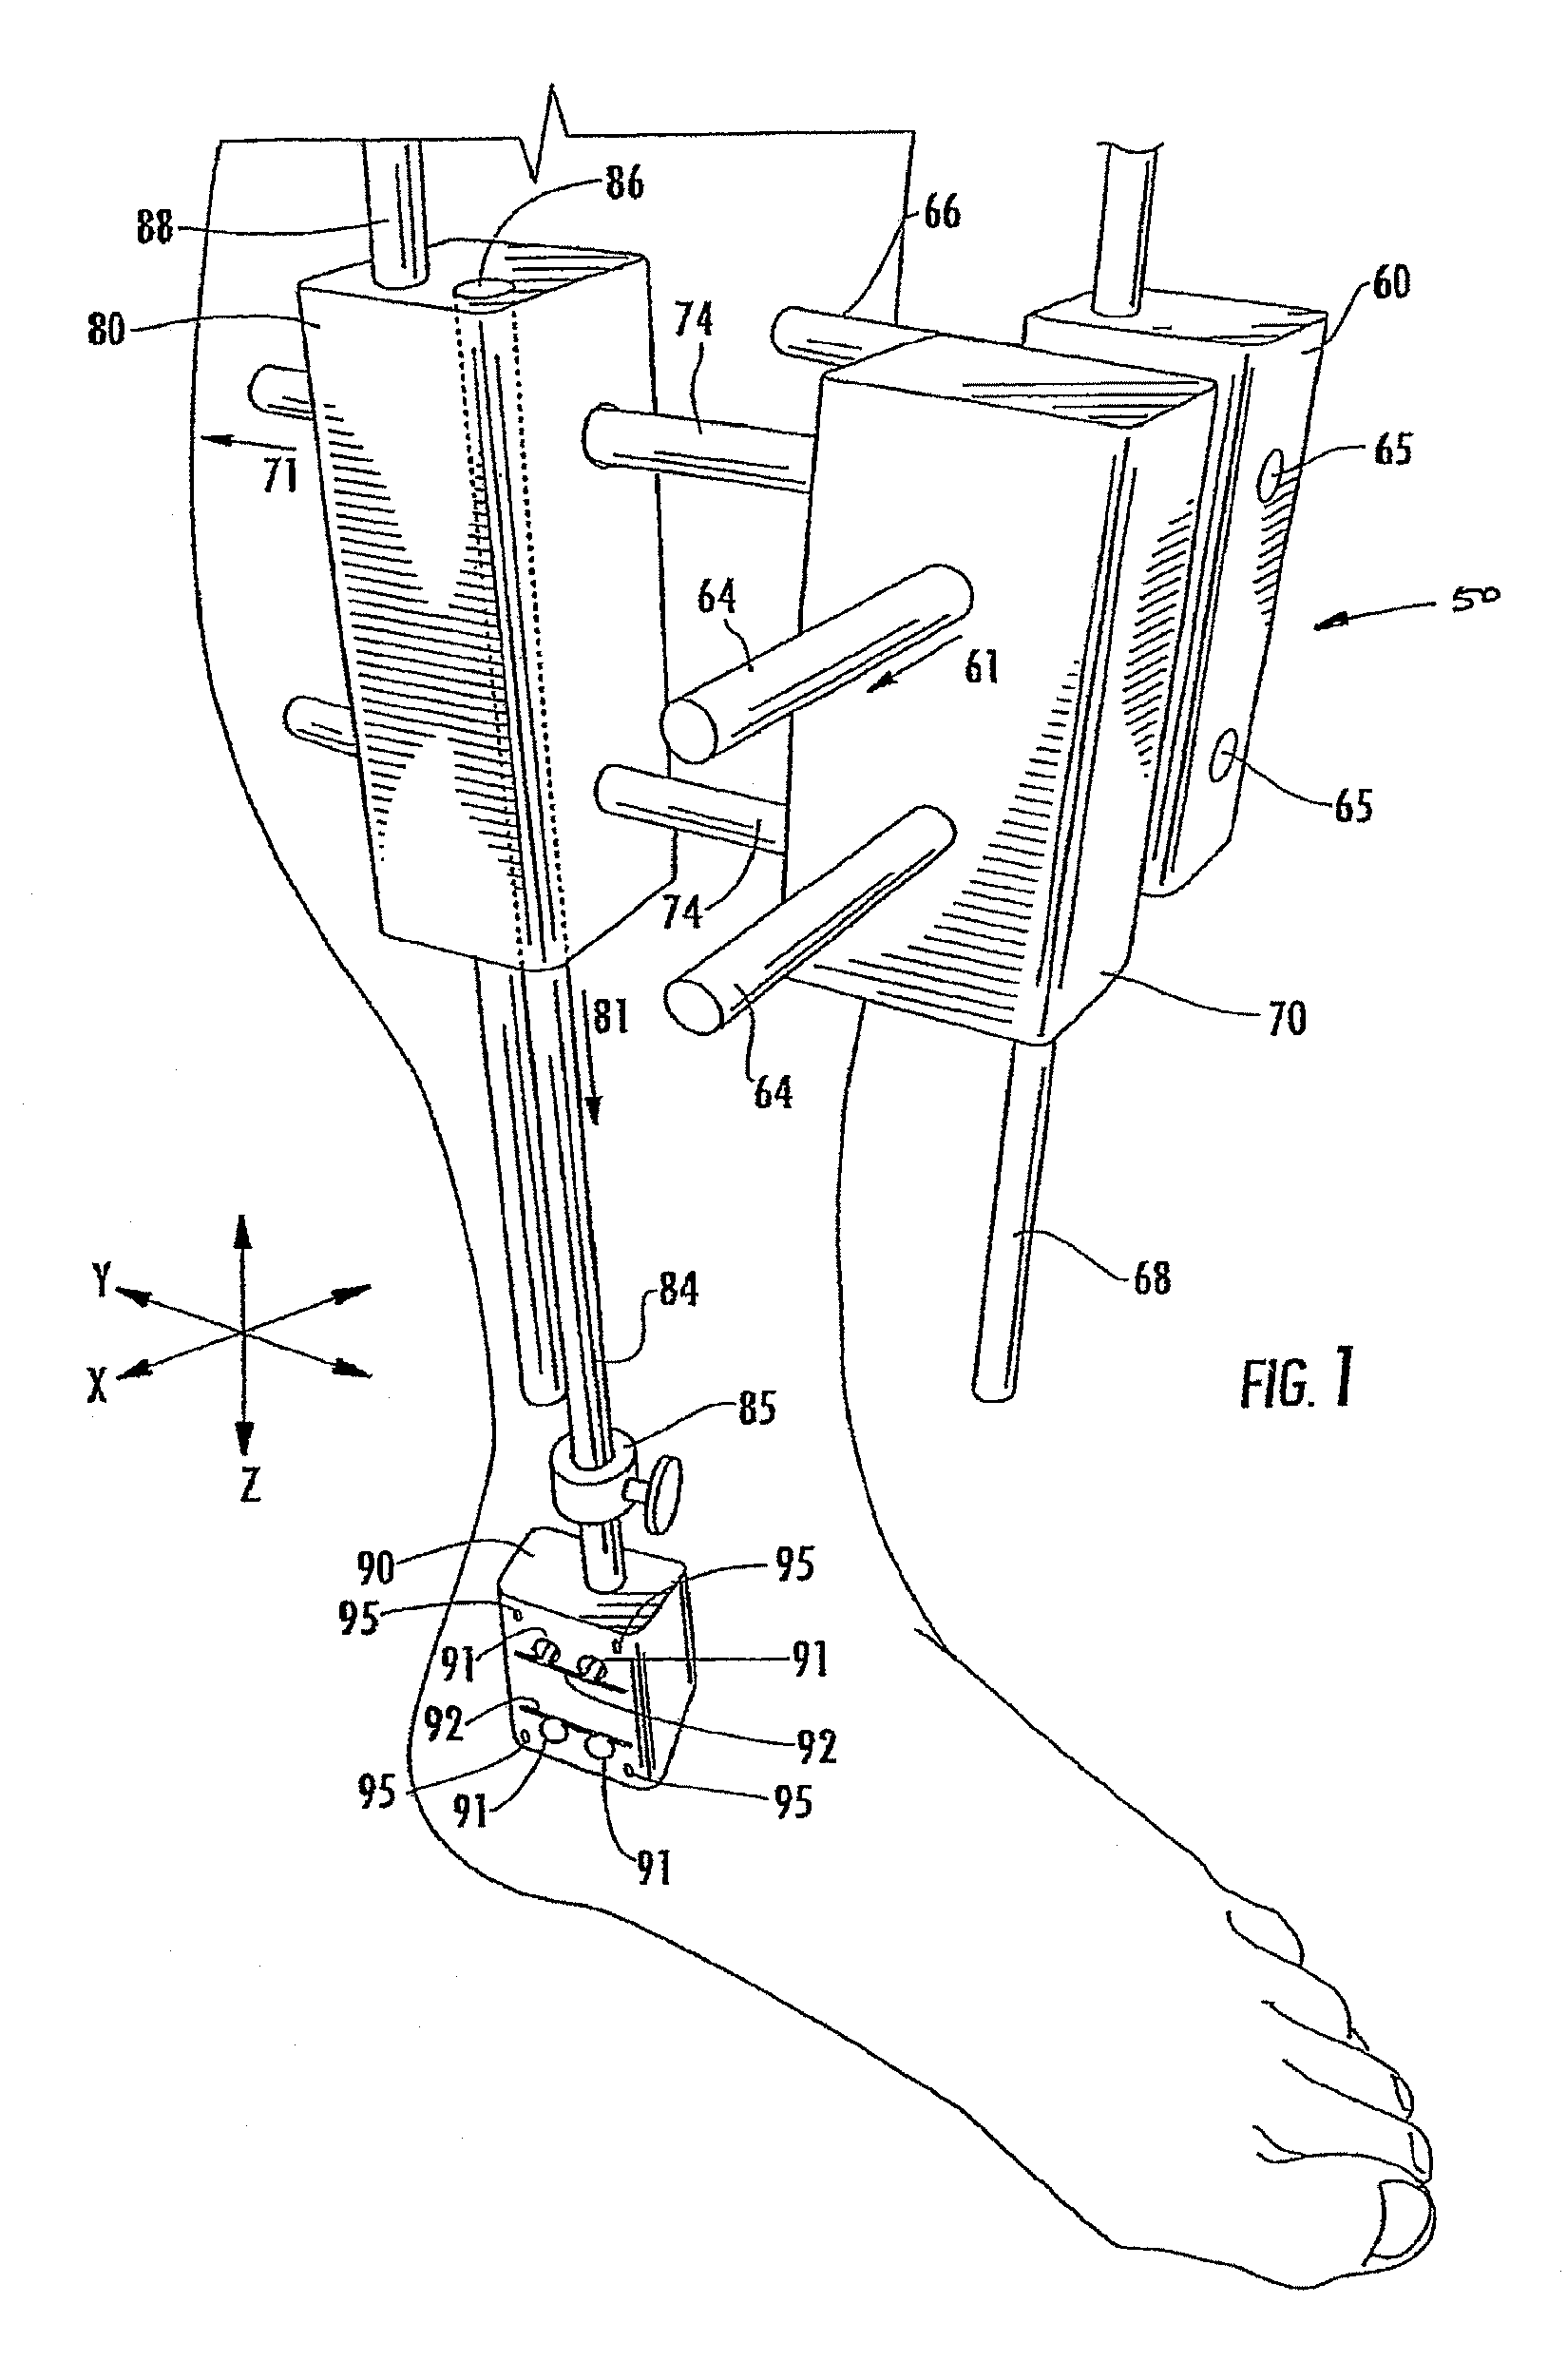 Method of preparing an ankle joint for replacement, joint prosthesis, and cutting alignment apparatus for use in performing an arthroplasty procedure